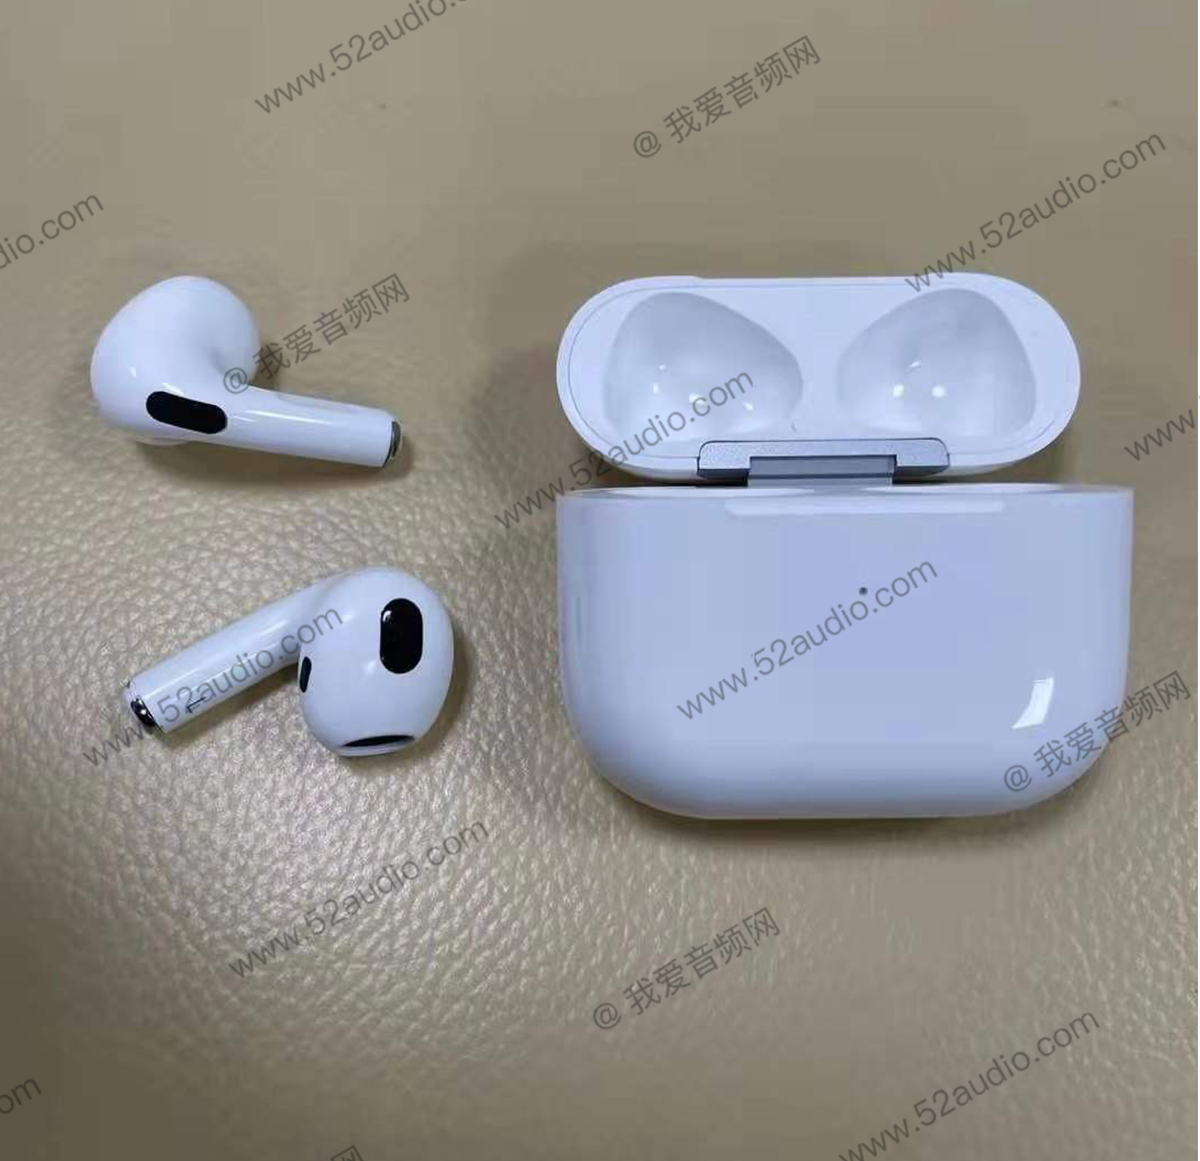 Leaked photos of the Apple AirPods 3 reveal absence of interchangeable ear tips